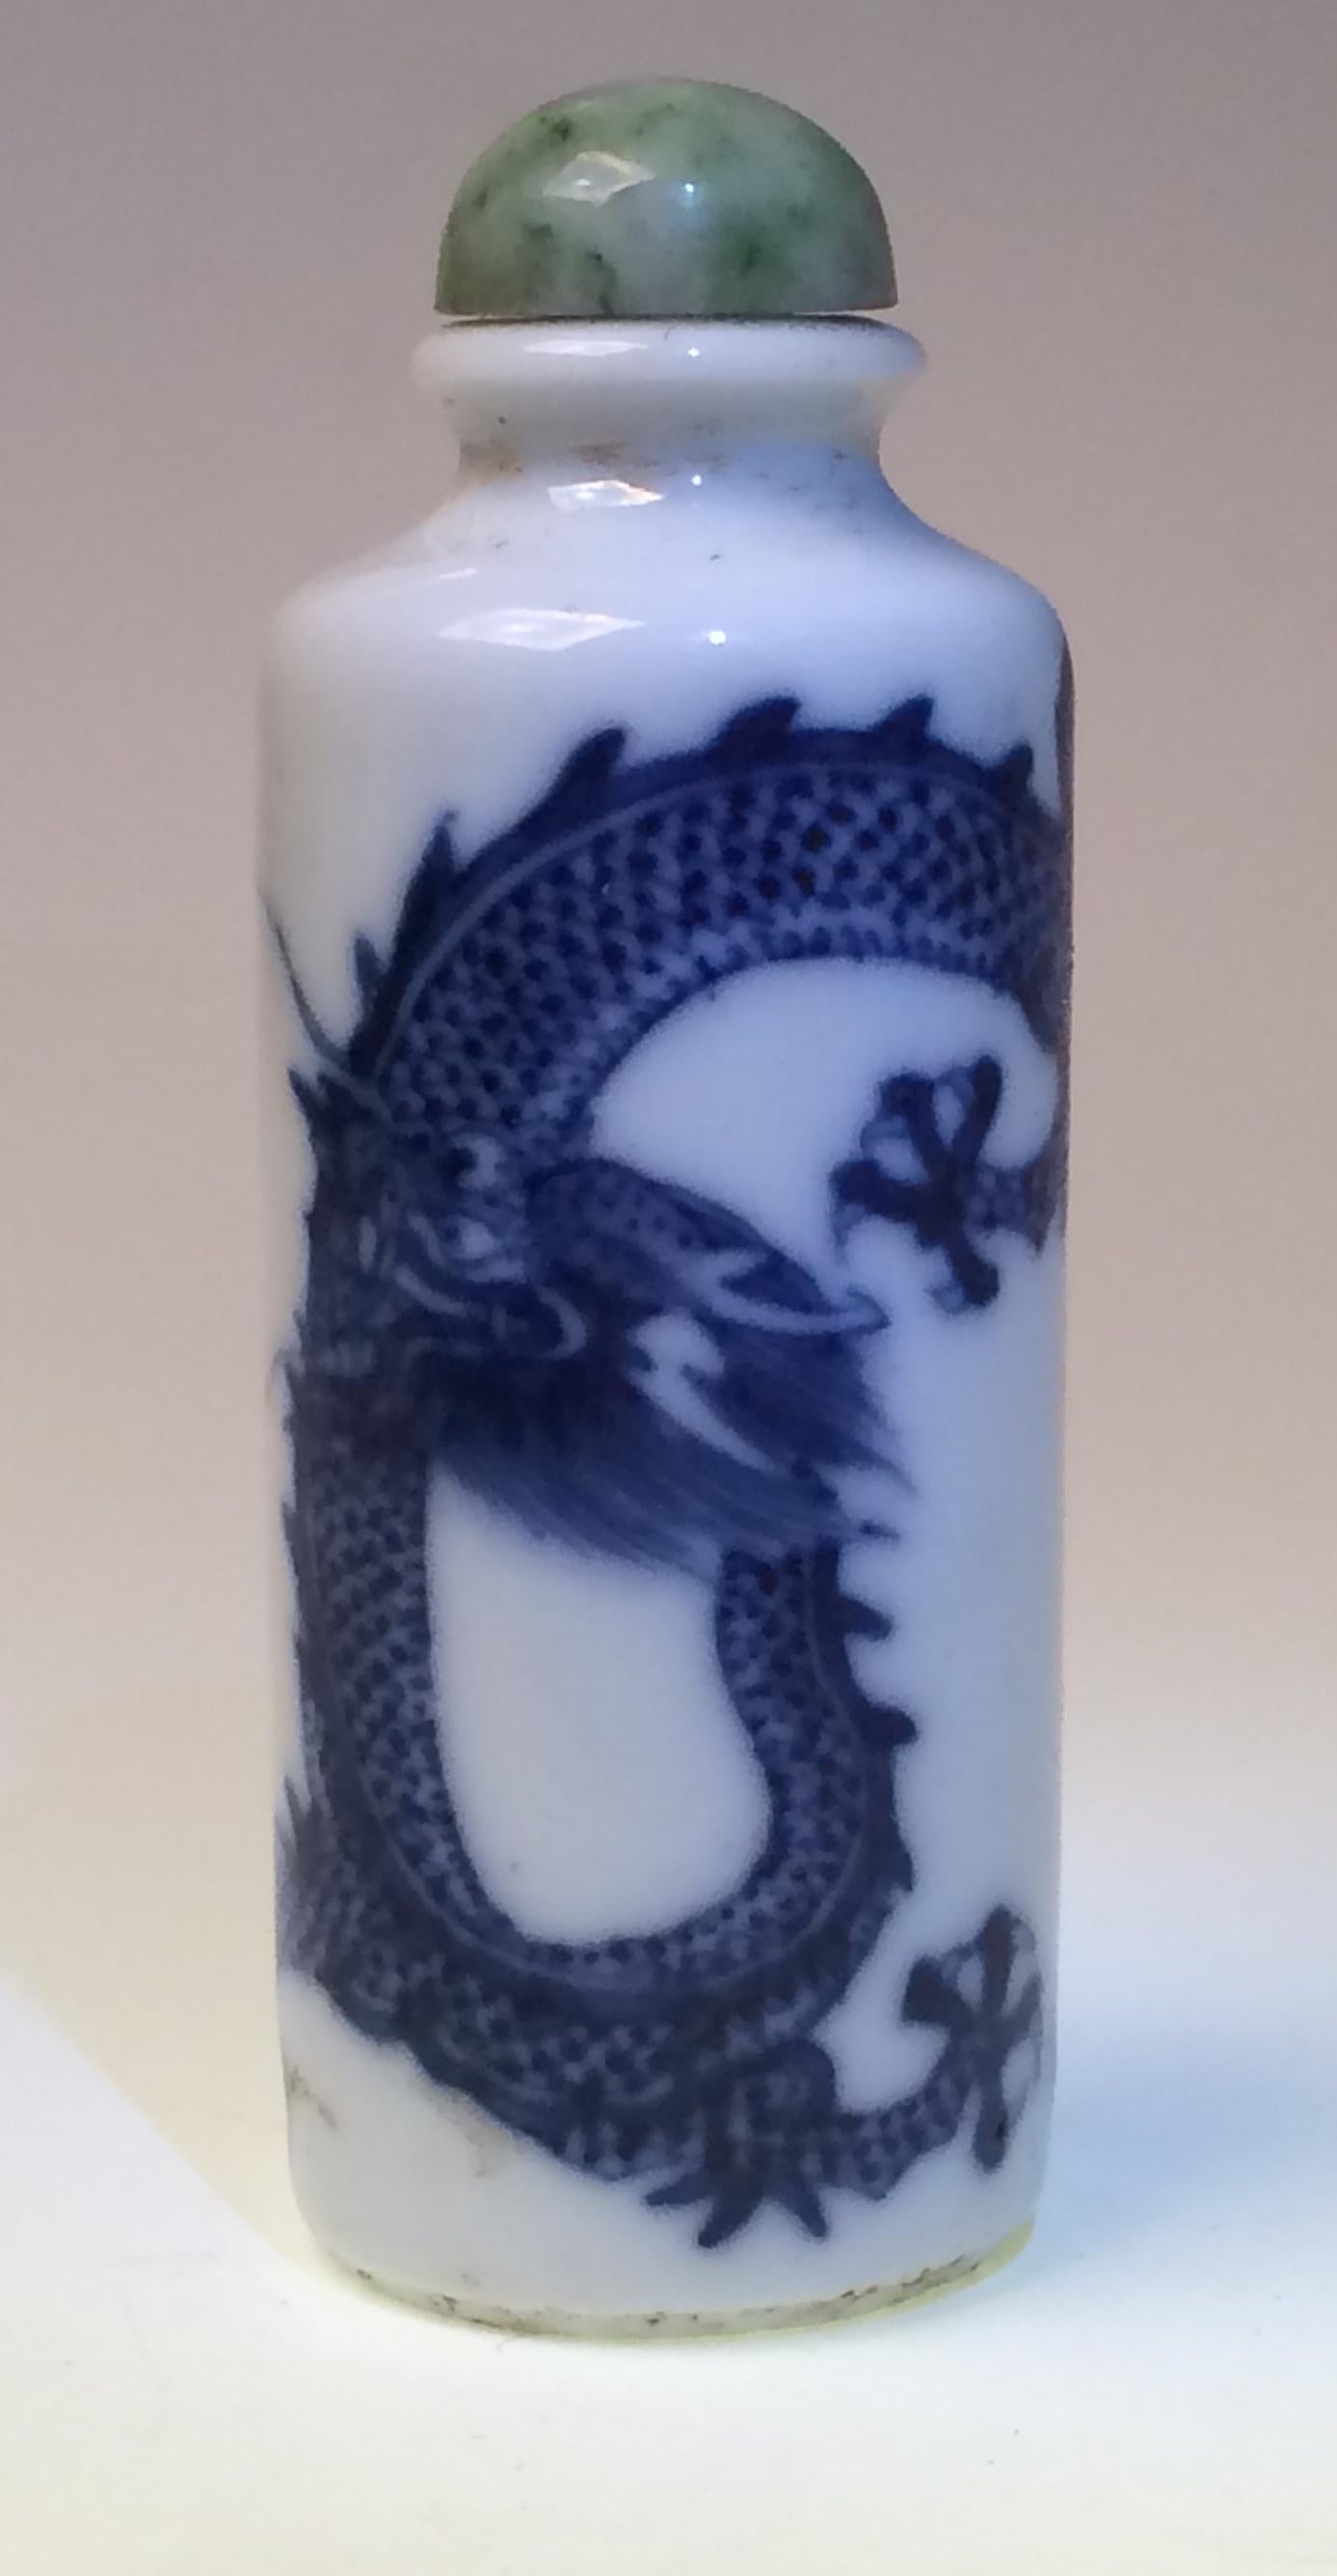 Chinese porcelain dragon snuff bottle, cylindrical pillar form with high shoulder, short neck, everted lip and concentric grooved base painted in underglaze cobalt blue of a single four clawed dragon wrapped around the body chasing a flaming pearl,